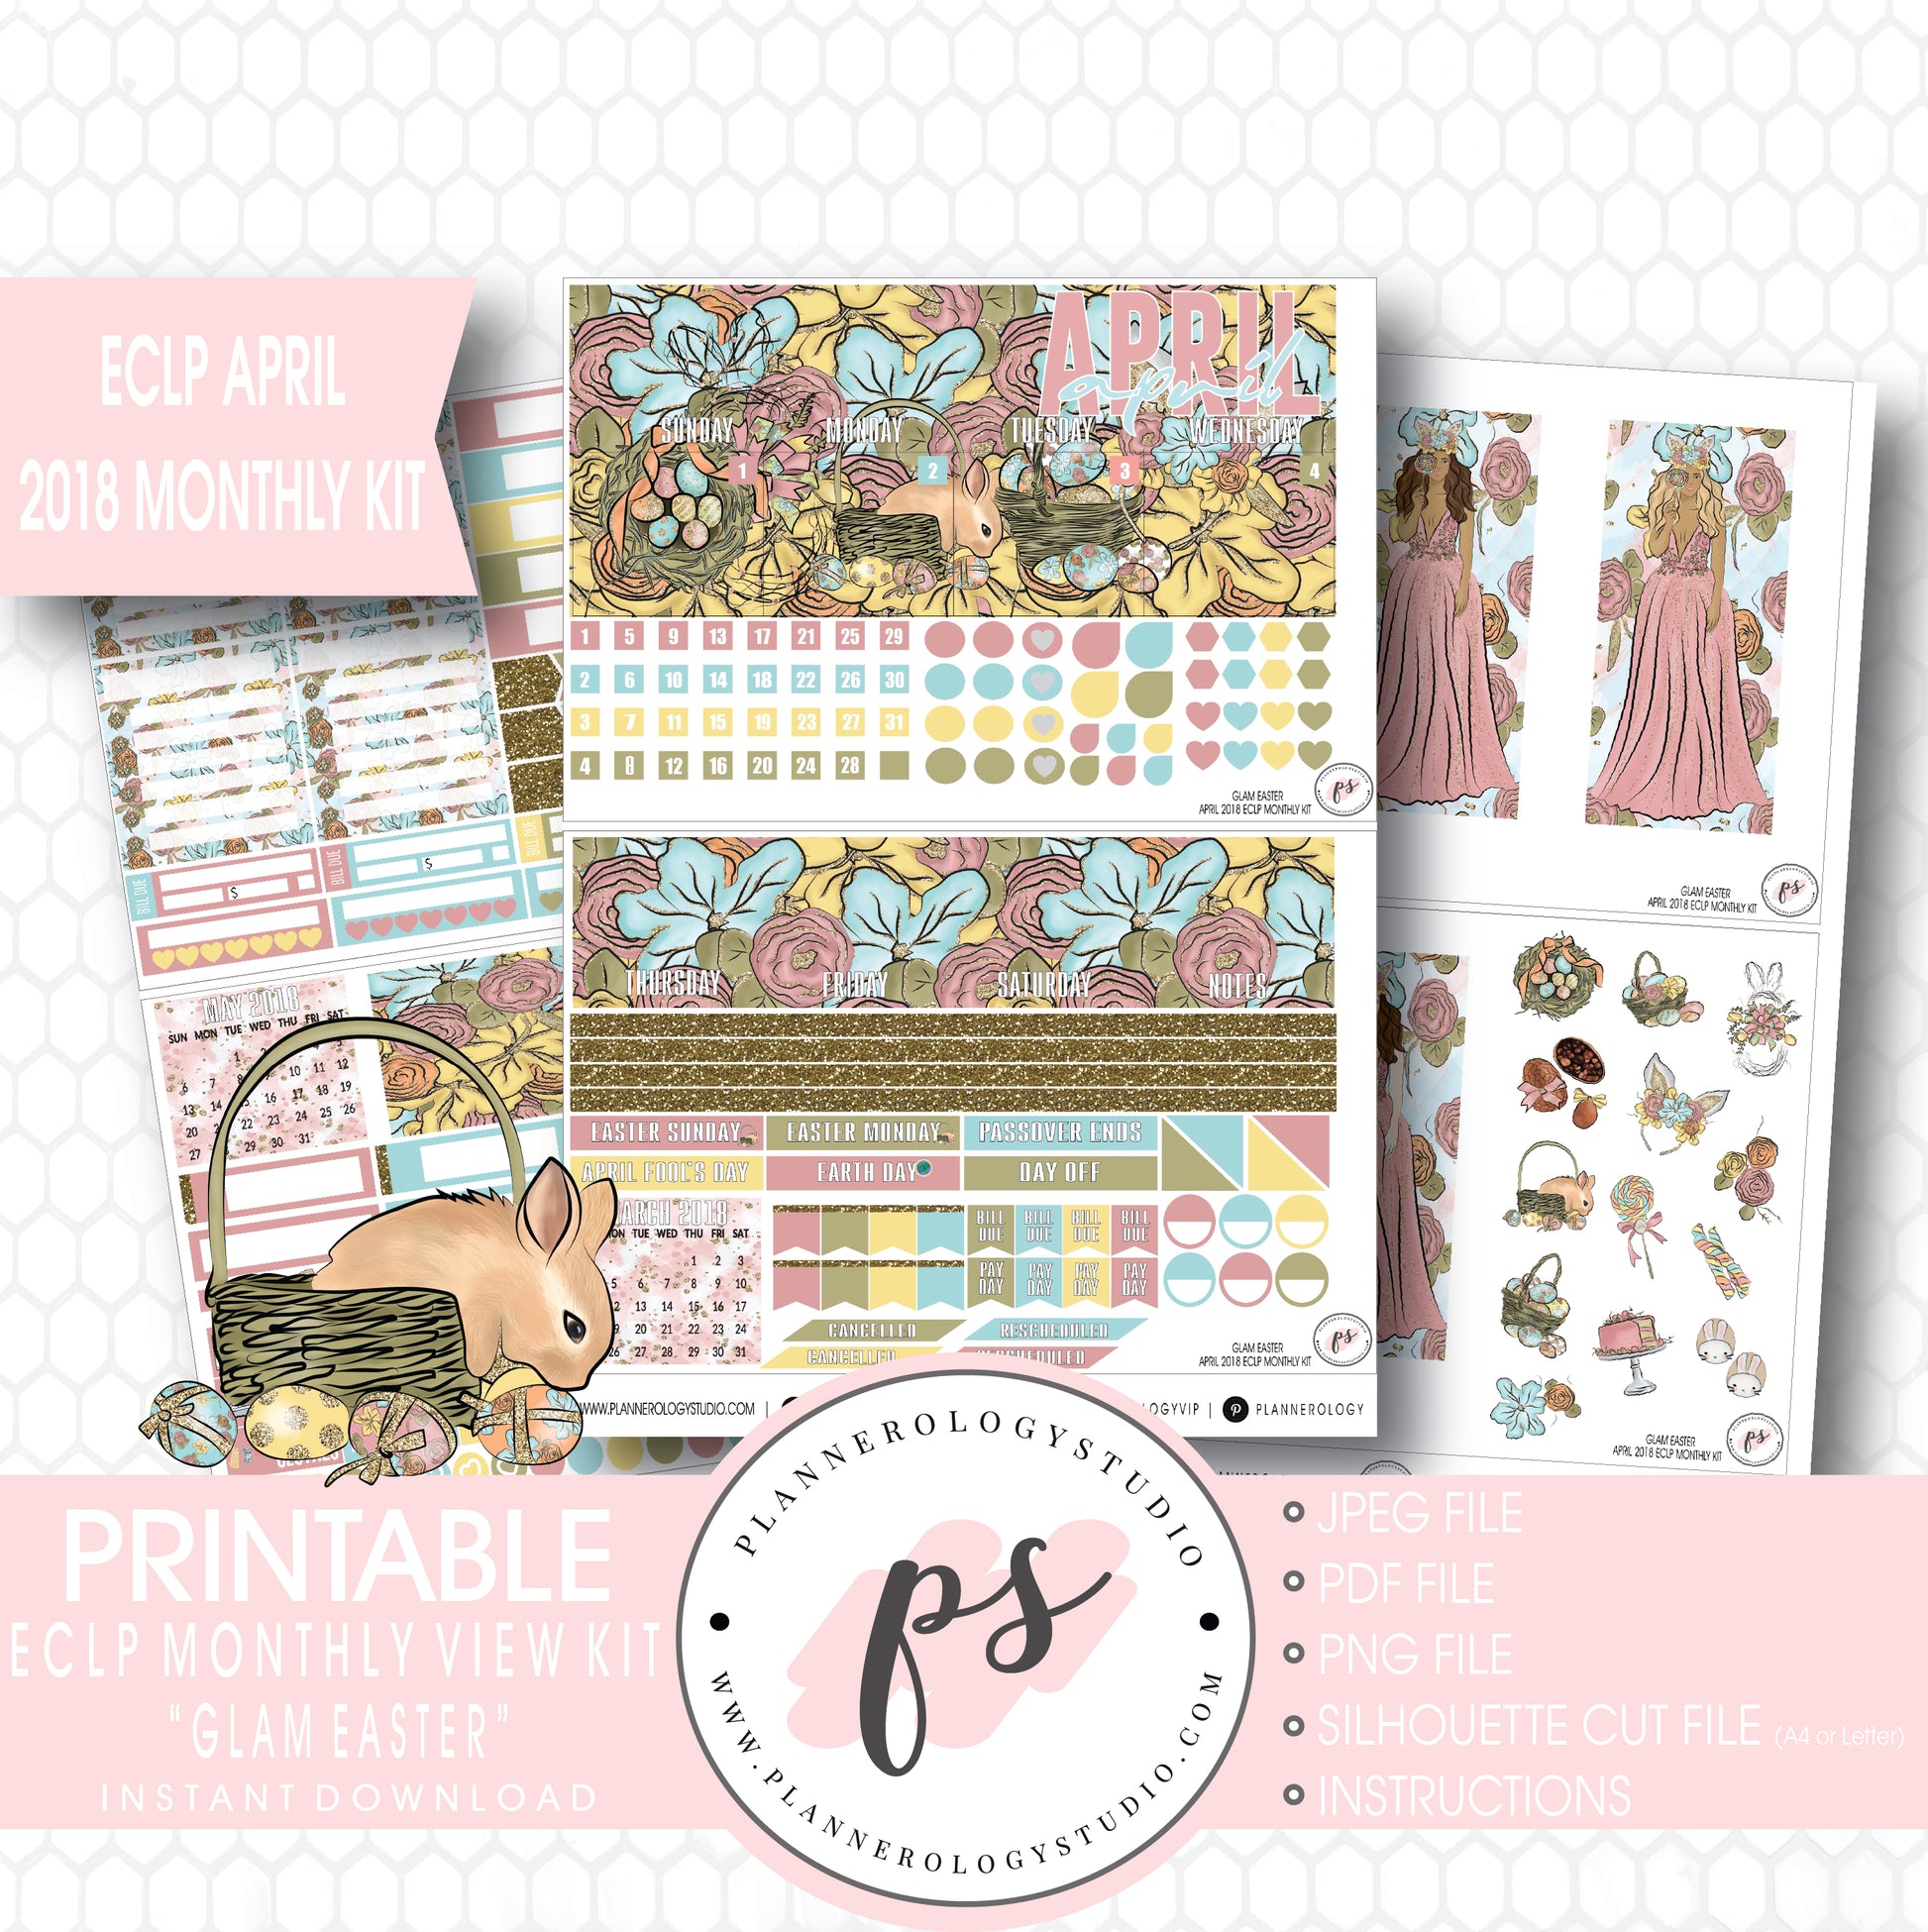 Glam Easter April 2018 Monthly View Kit Digital Printable Planner Stickers (for use with Erin Condren) - Plannerologystudio